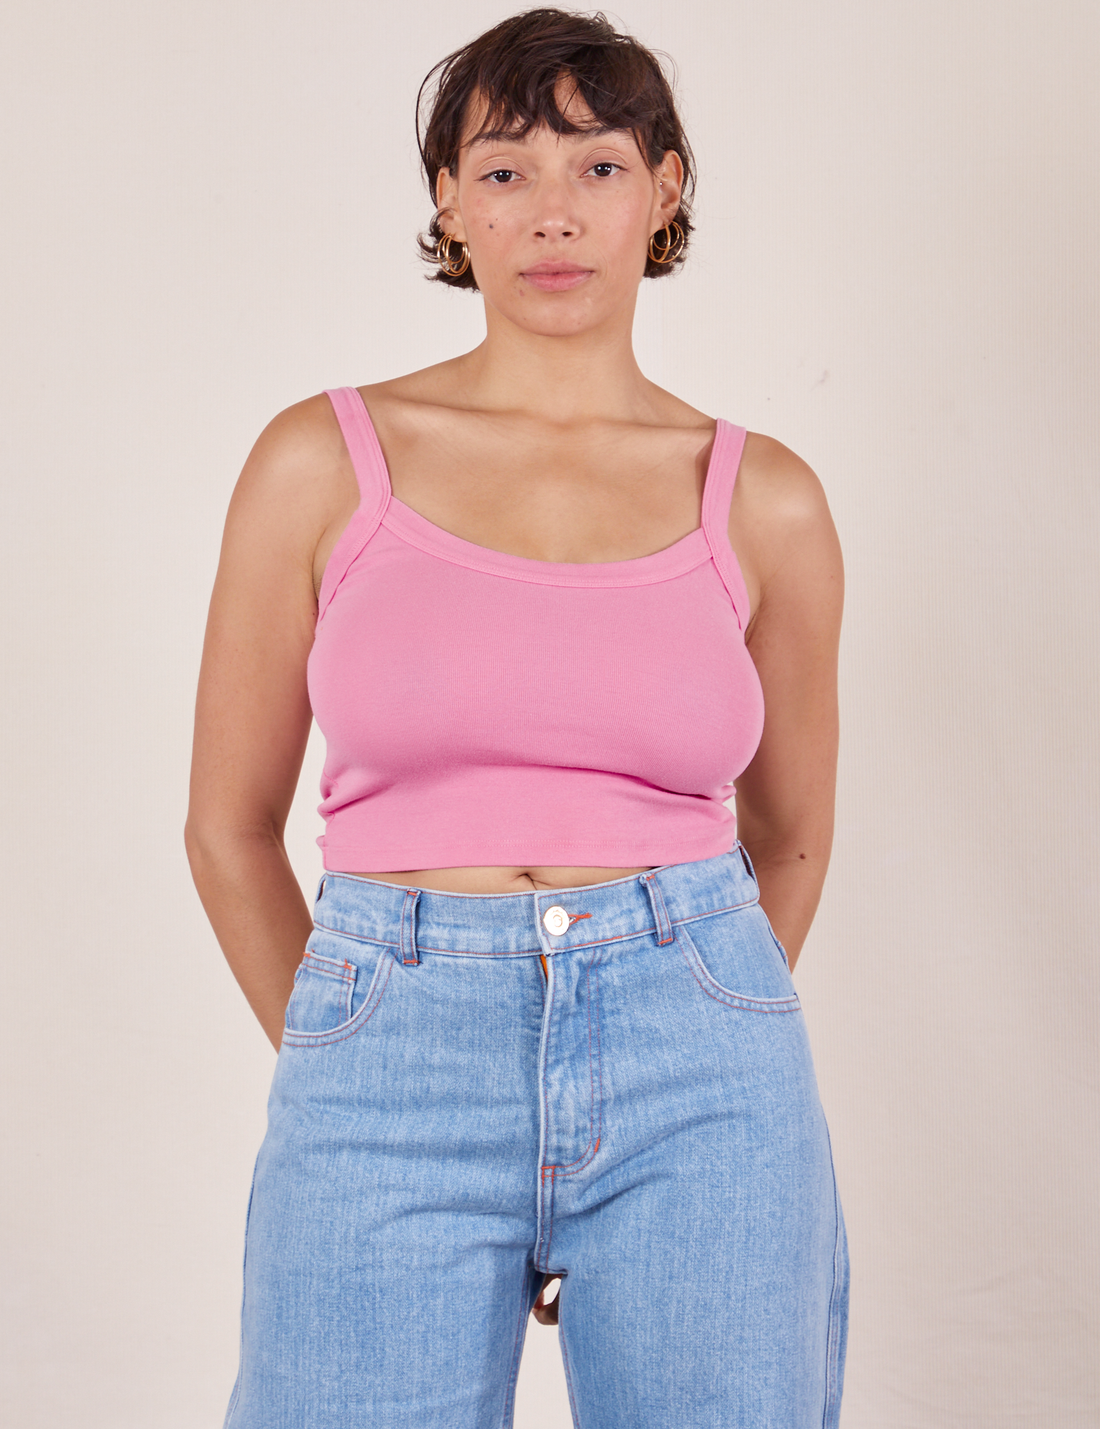 Tiara is wearing Cropped Cami in Bubblegum Pink and light wash Sailor Jeans